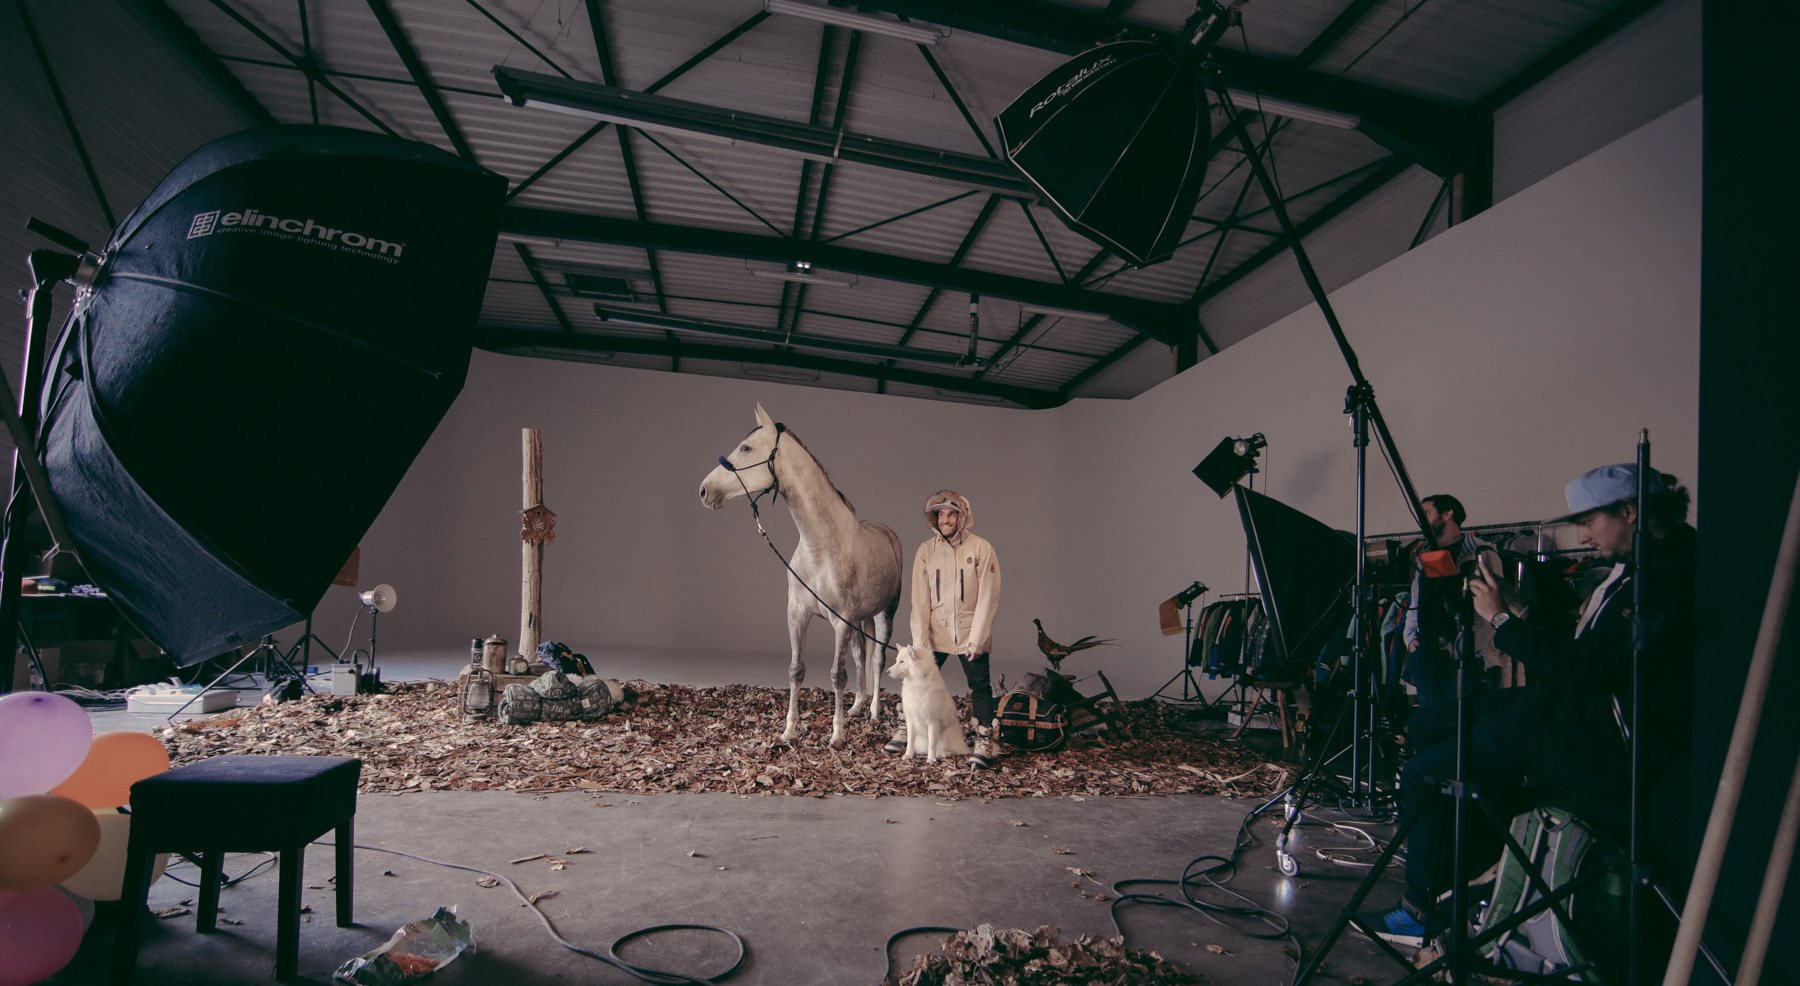 Making of Picture winter 15 - Jean-Charles BELMONT - Riot House Studio